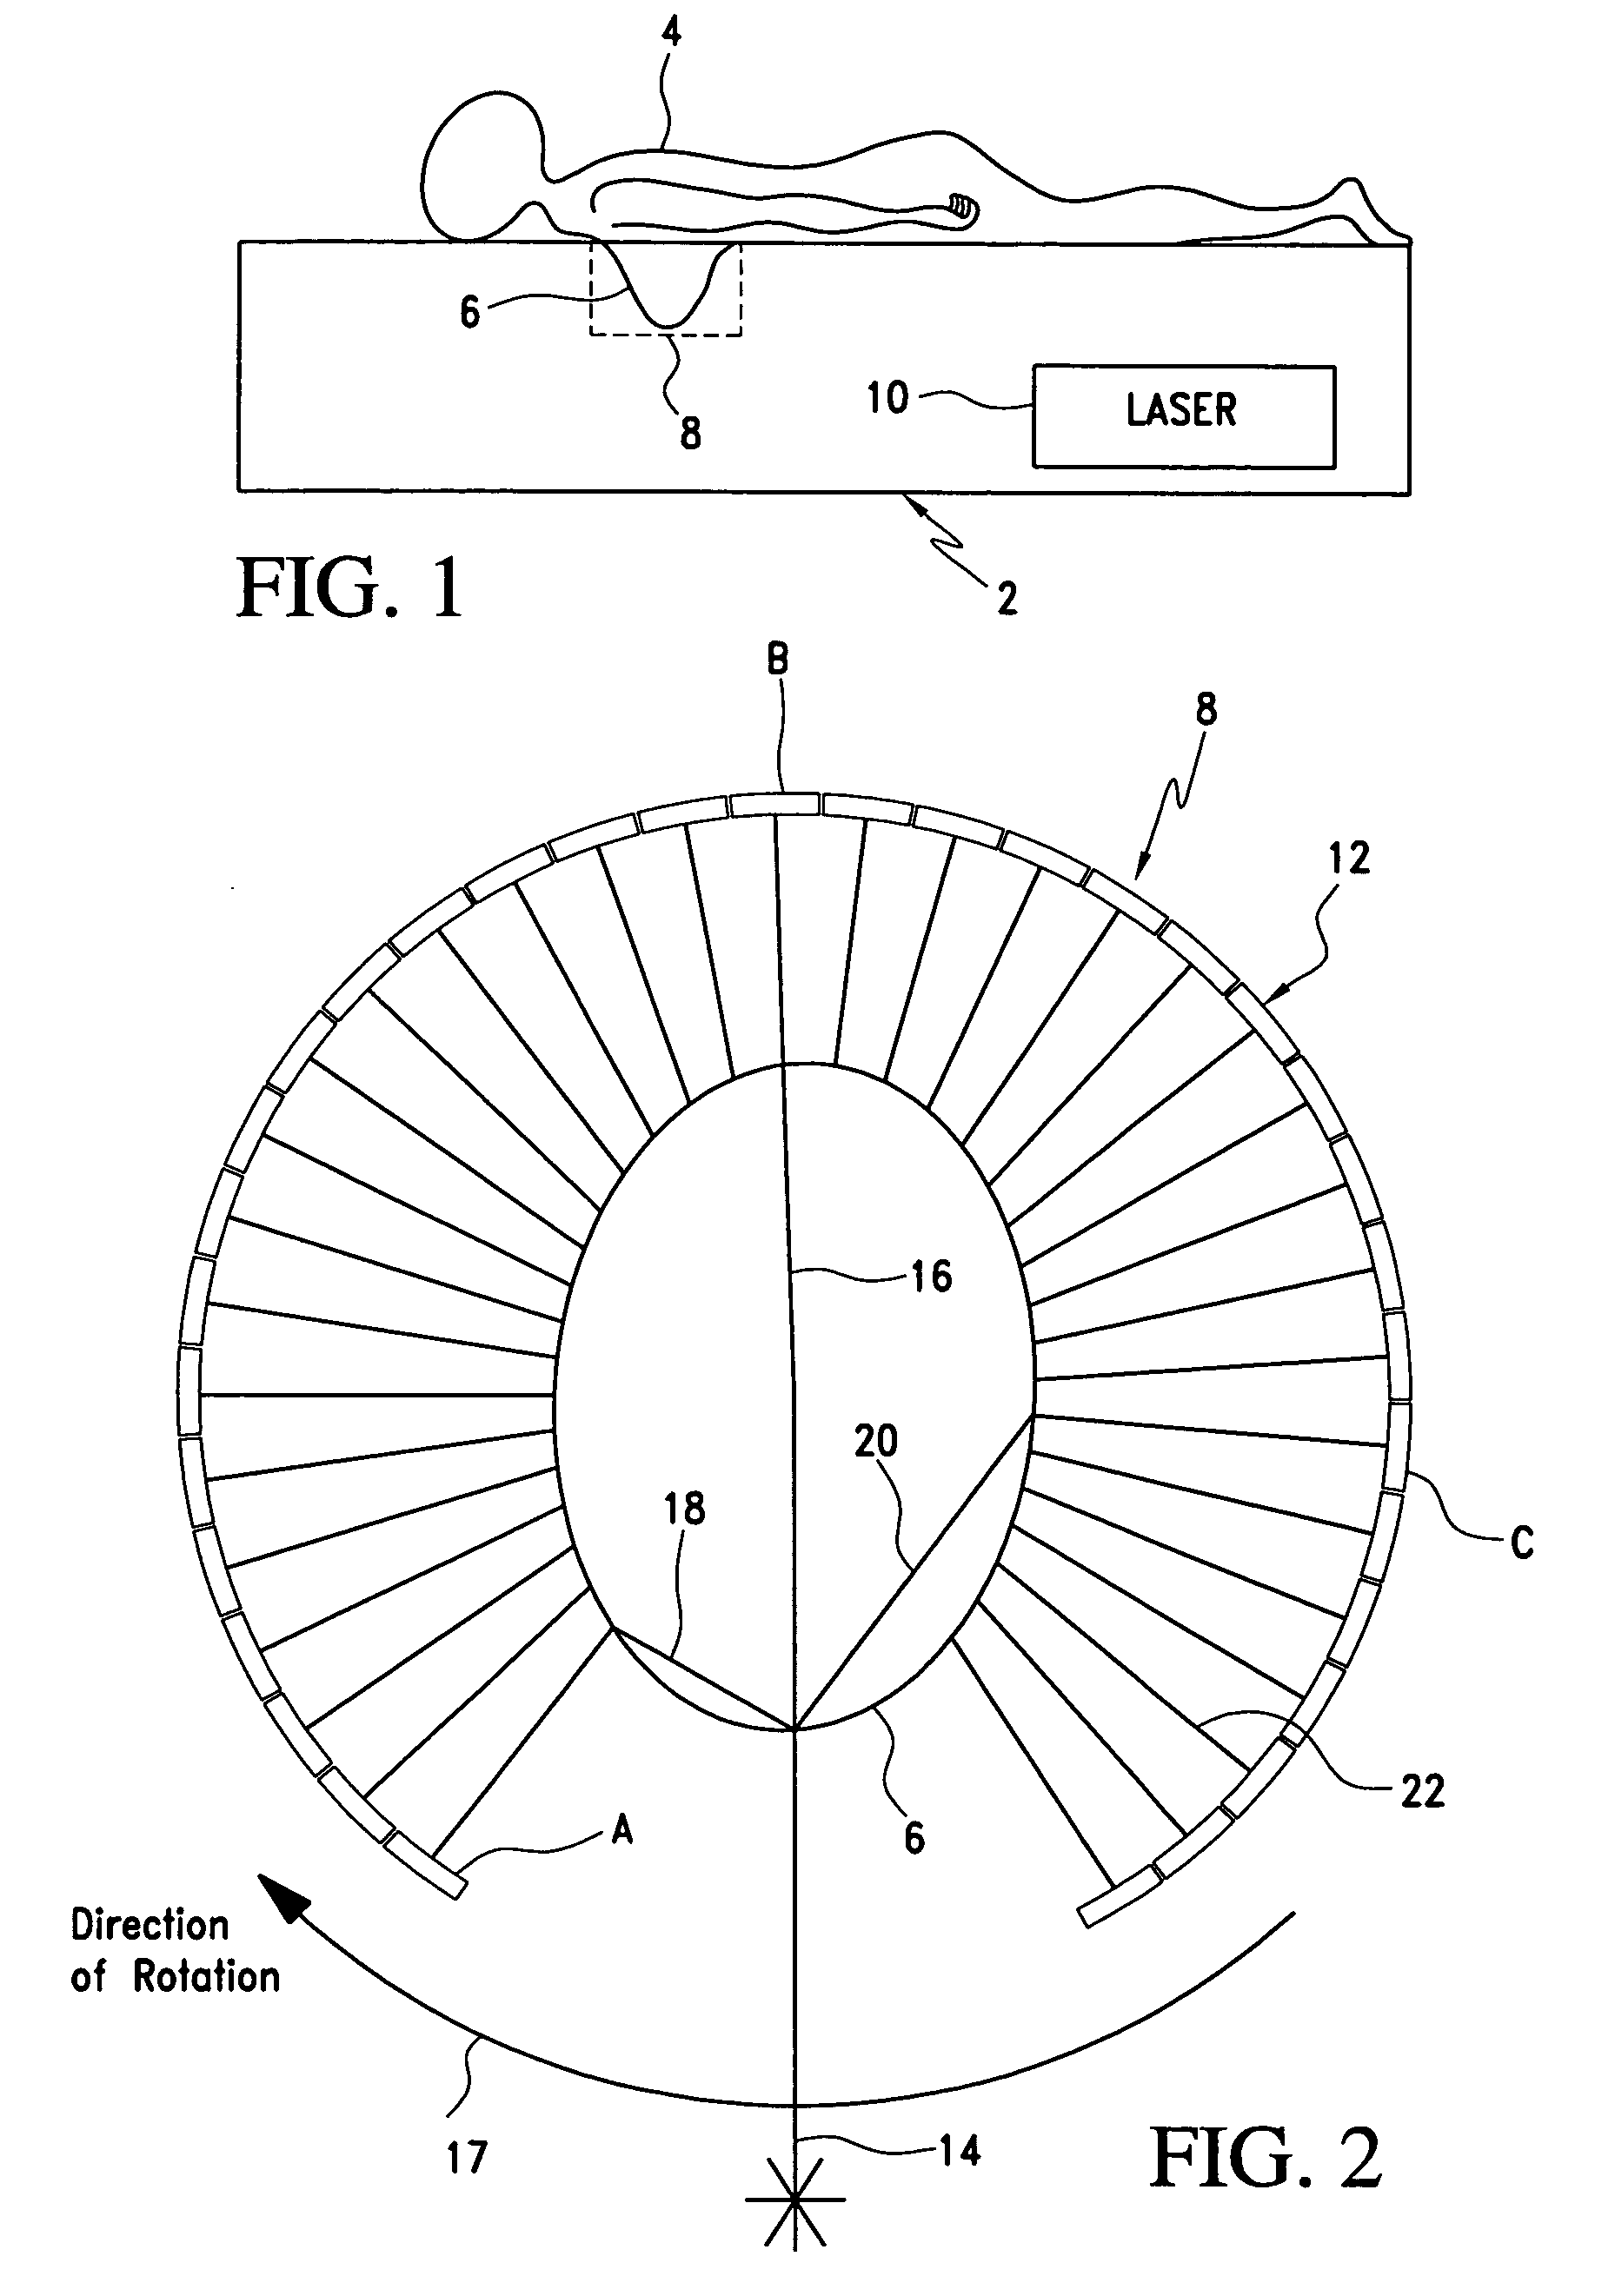 Laser imaging apparatus with variable power, orbit time and beam diameter